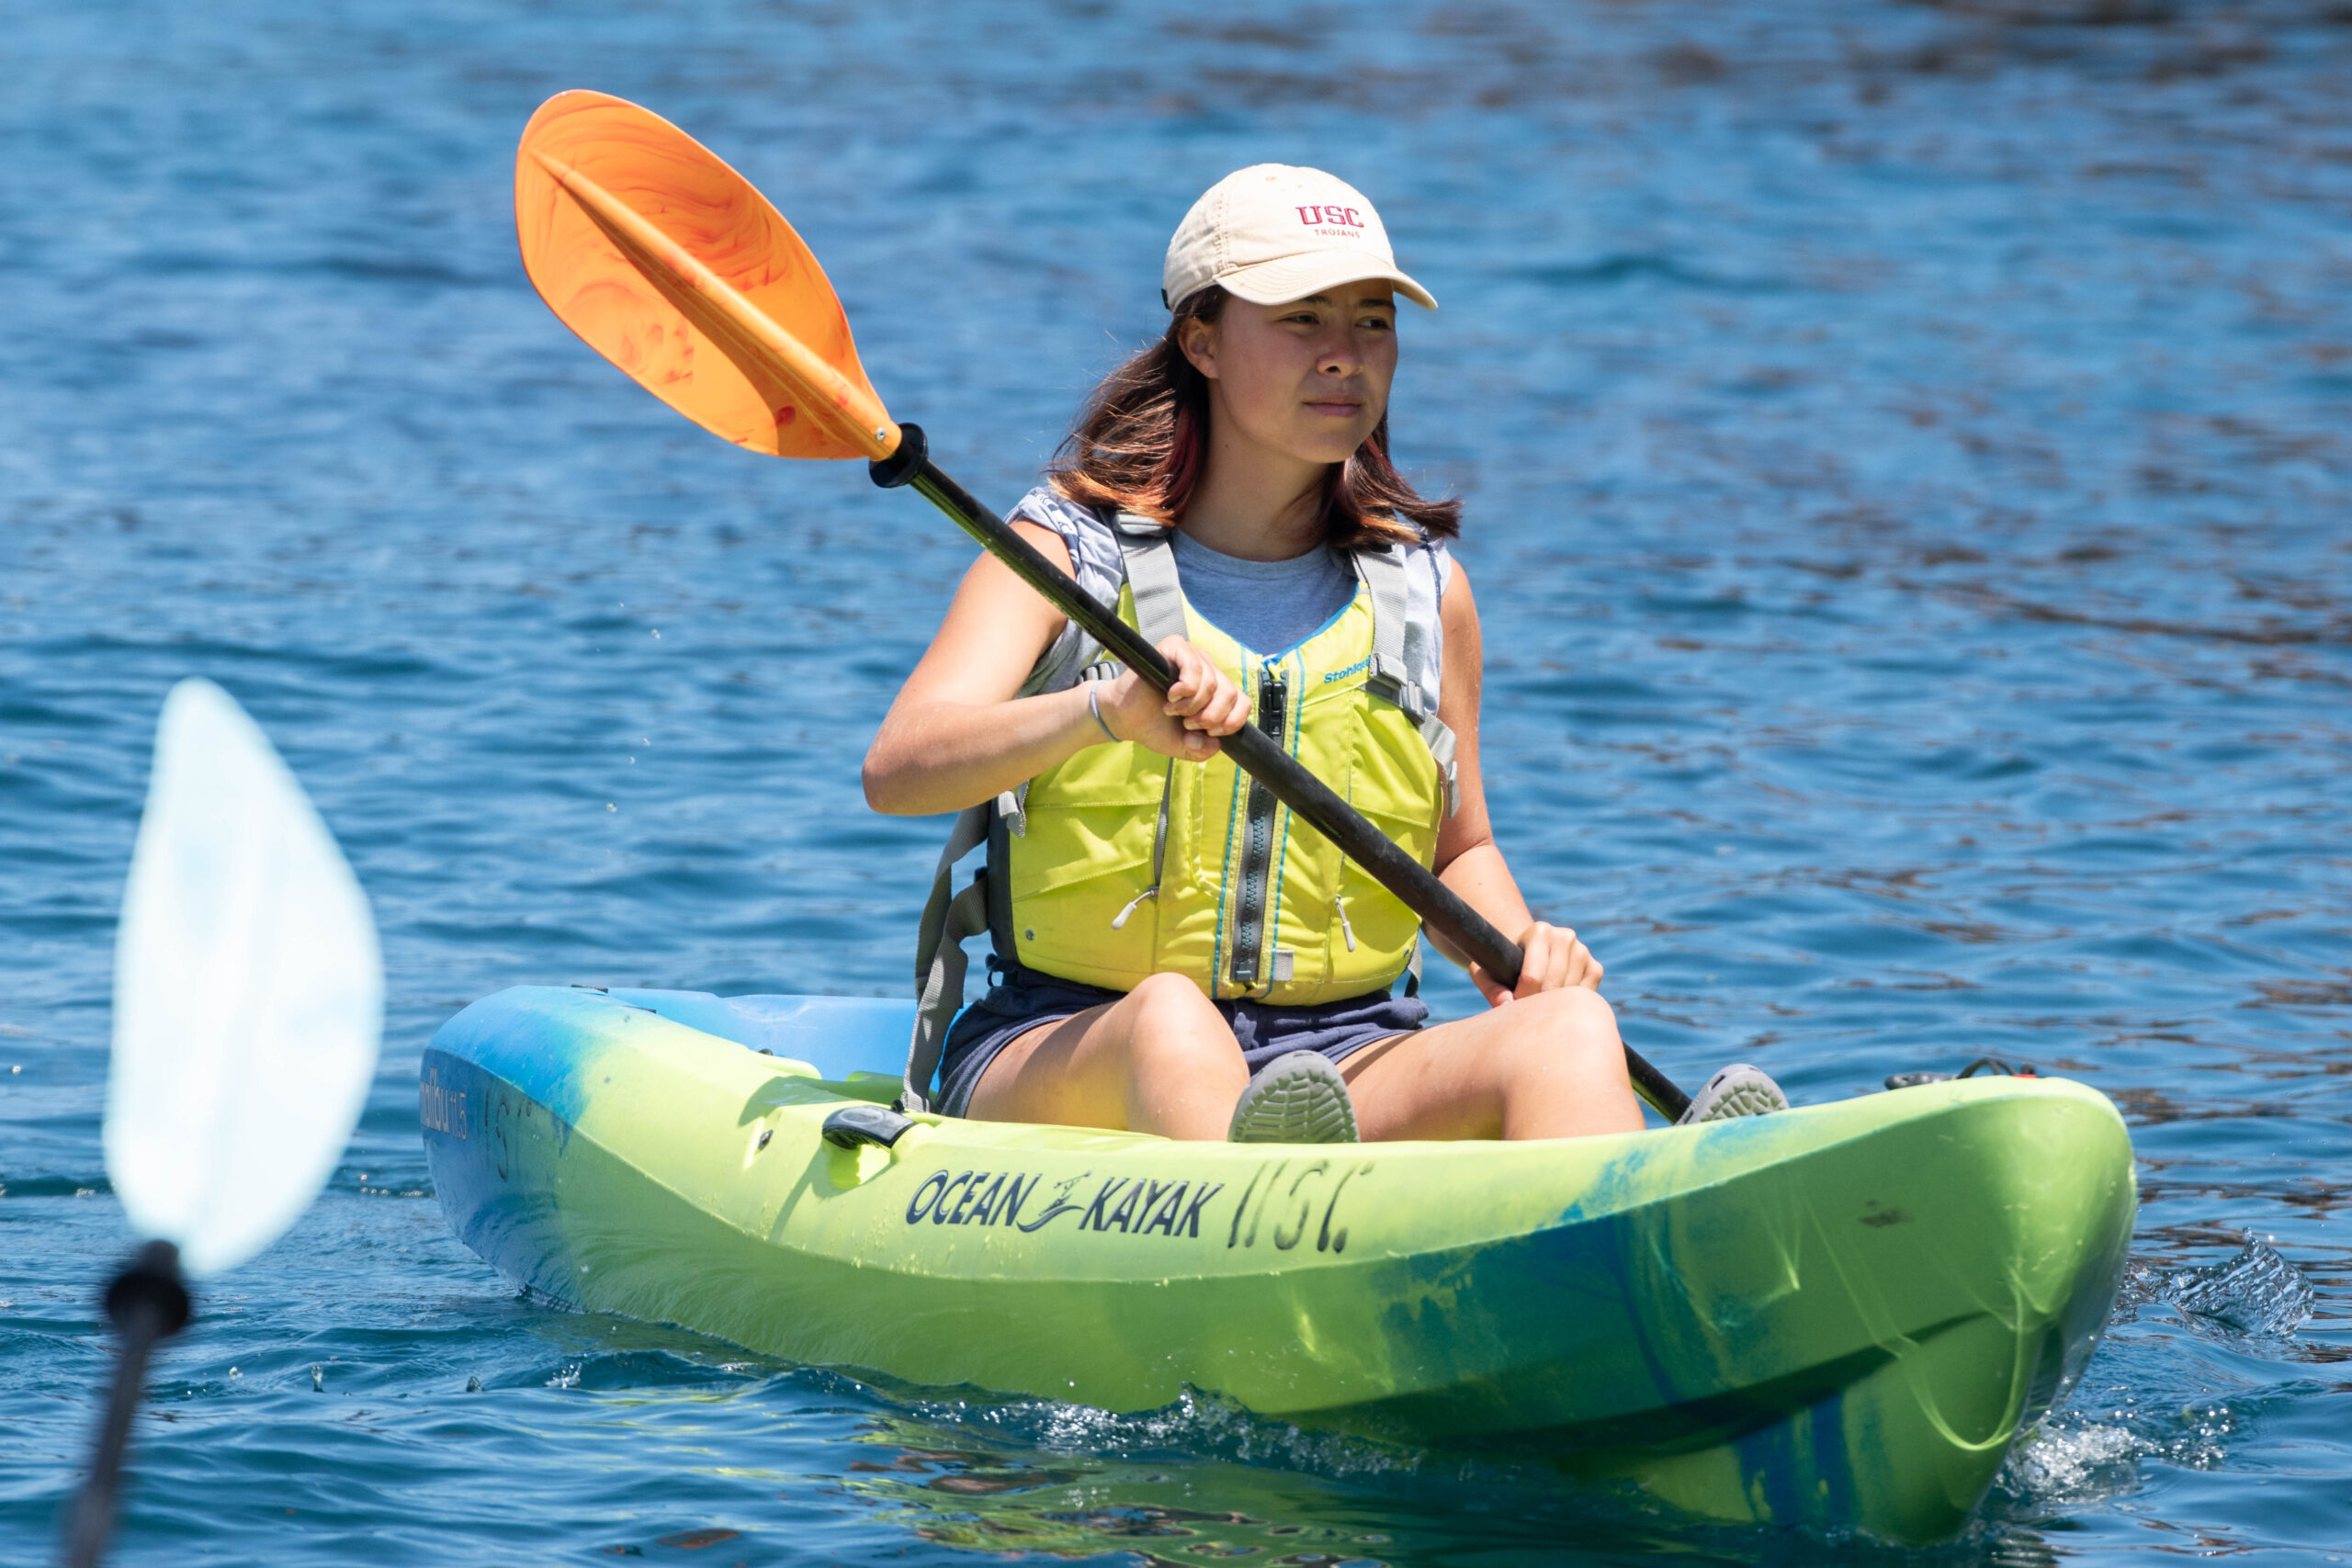 person wearing a bright yellow life vest and USC baseball cap sits on a kayak while paddling